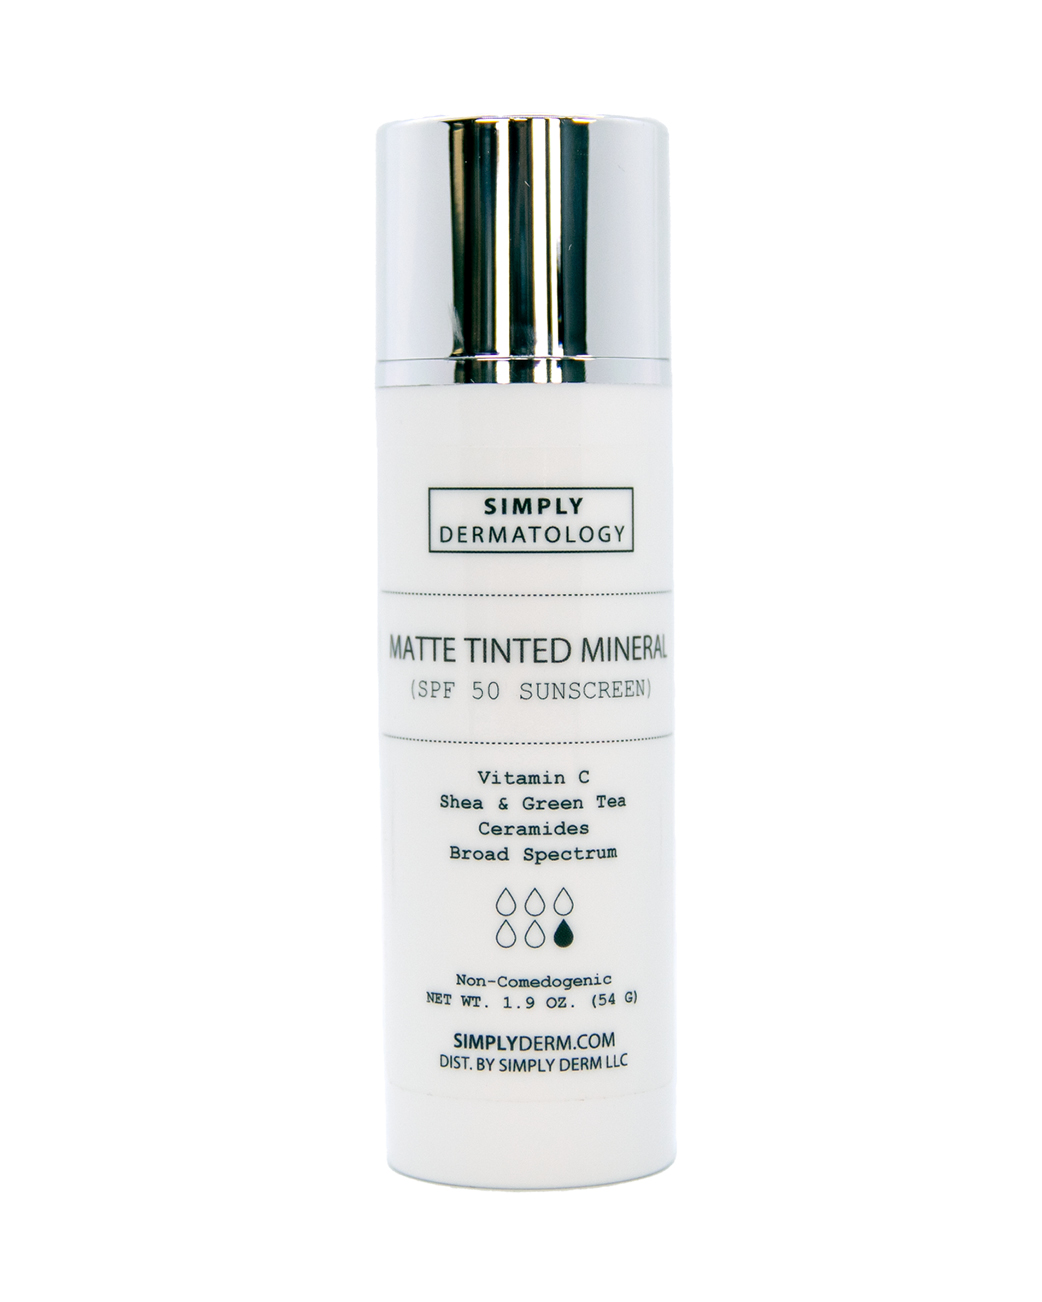 Matte Tinted Mineral Sunscreen